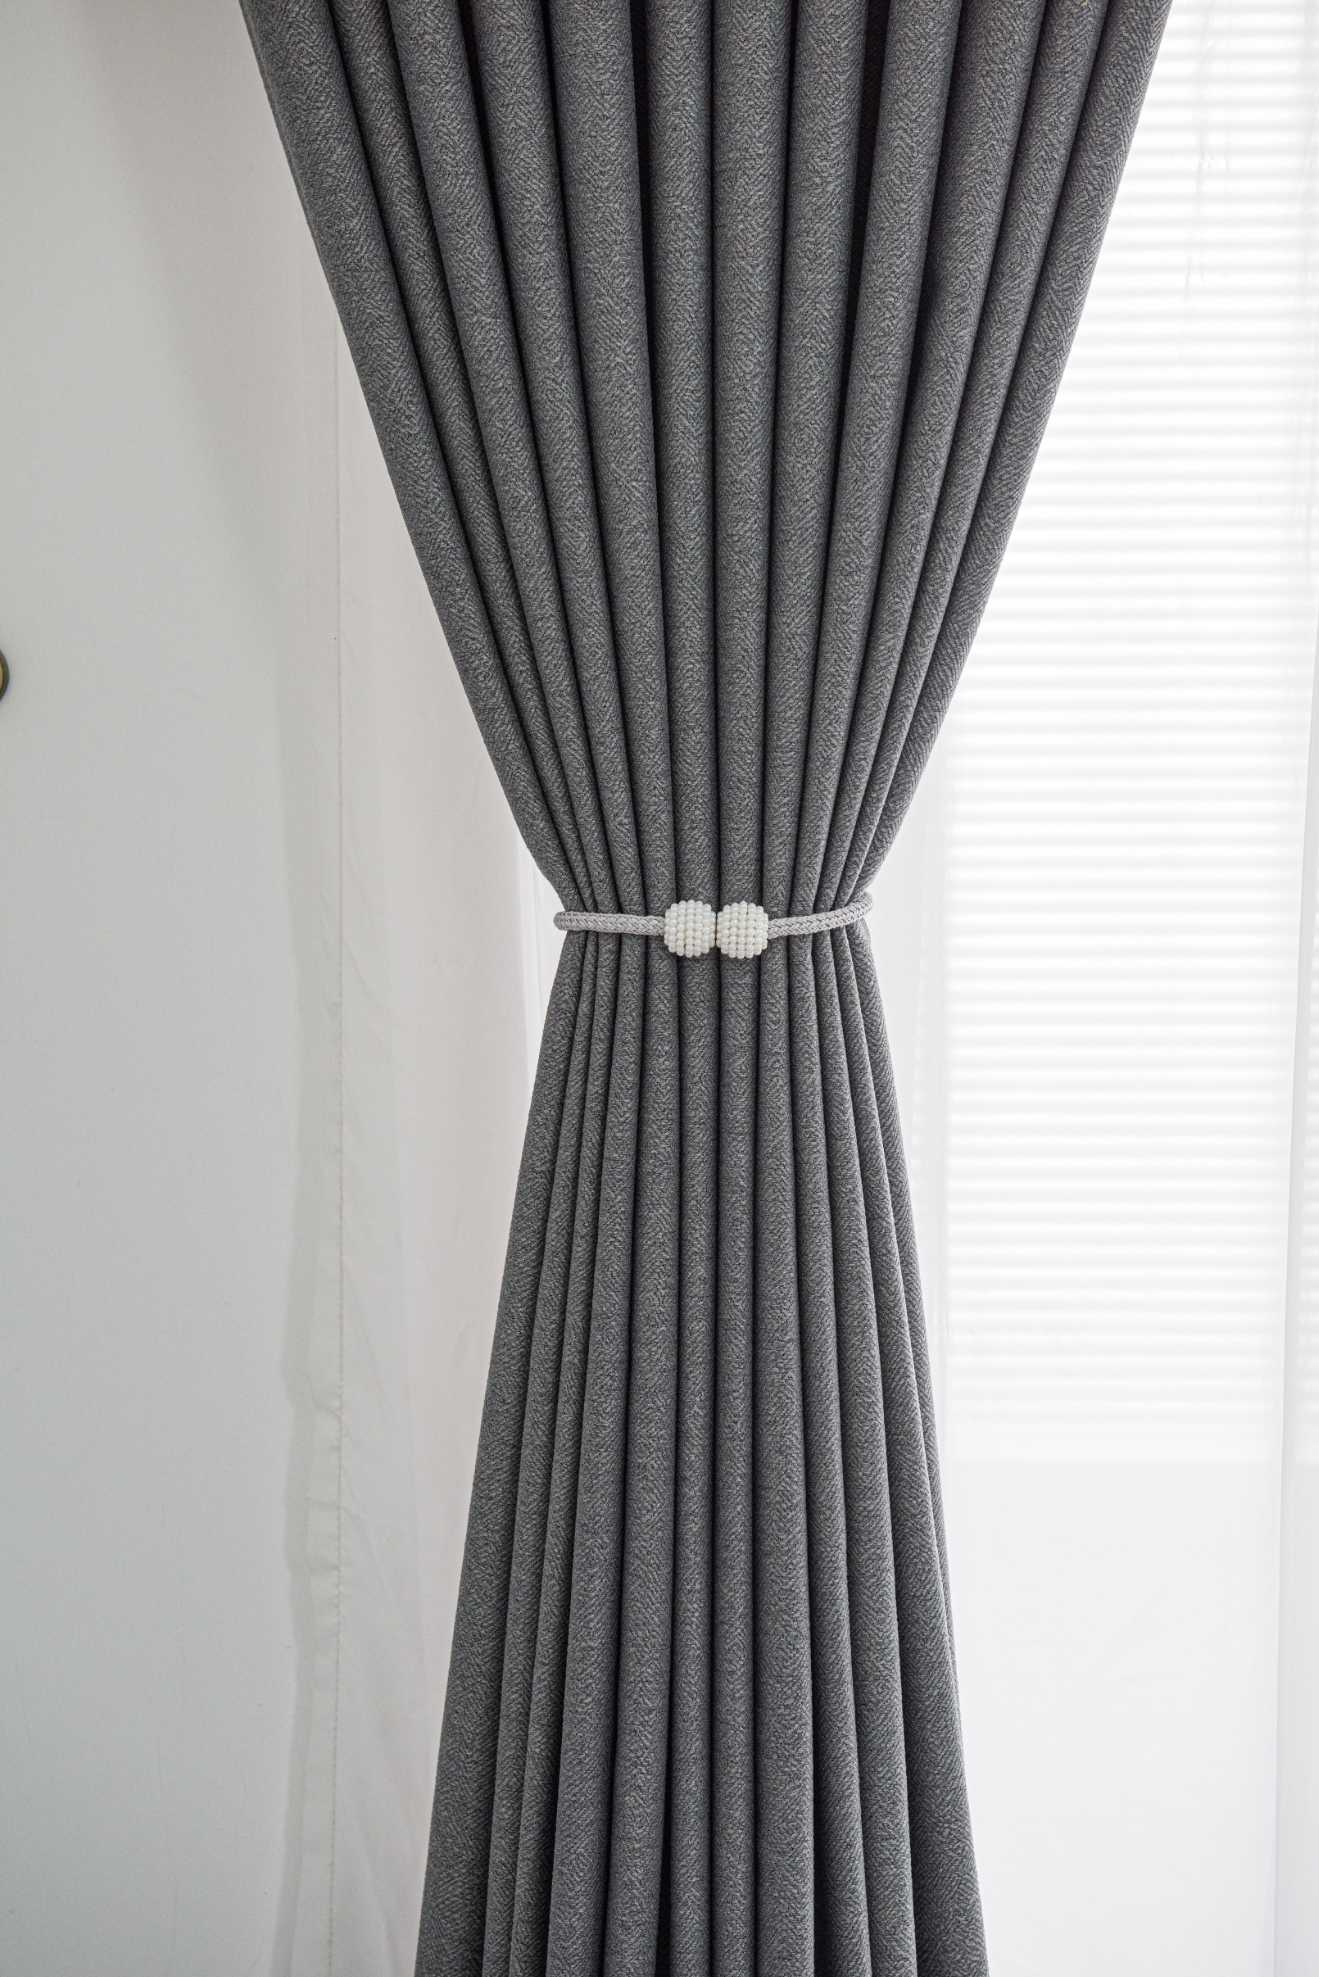 Geometric Patterned-Efficient Thermal Insulated Blackout Curtains Efficient Grommet Drapes | 2 panels